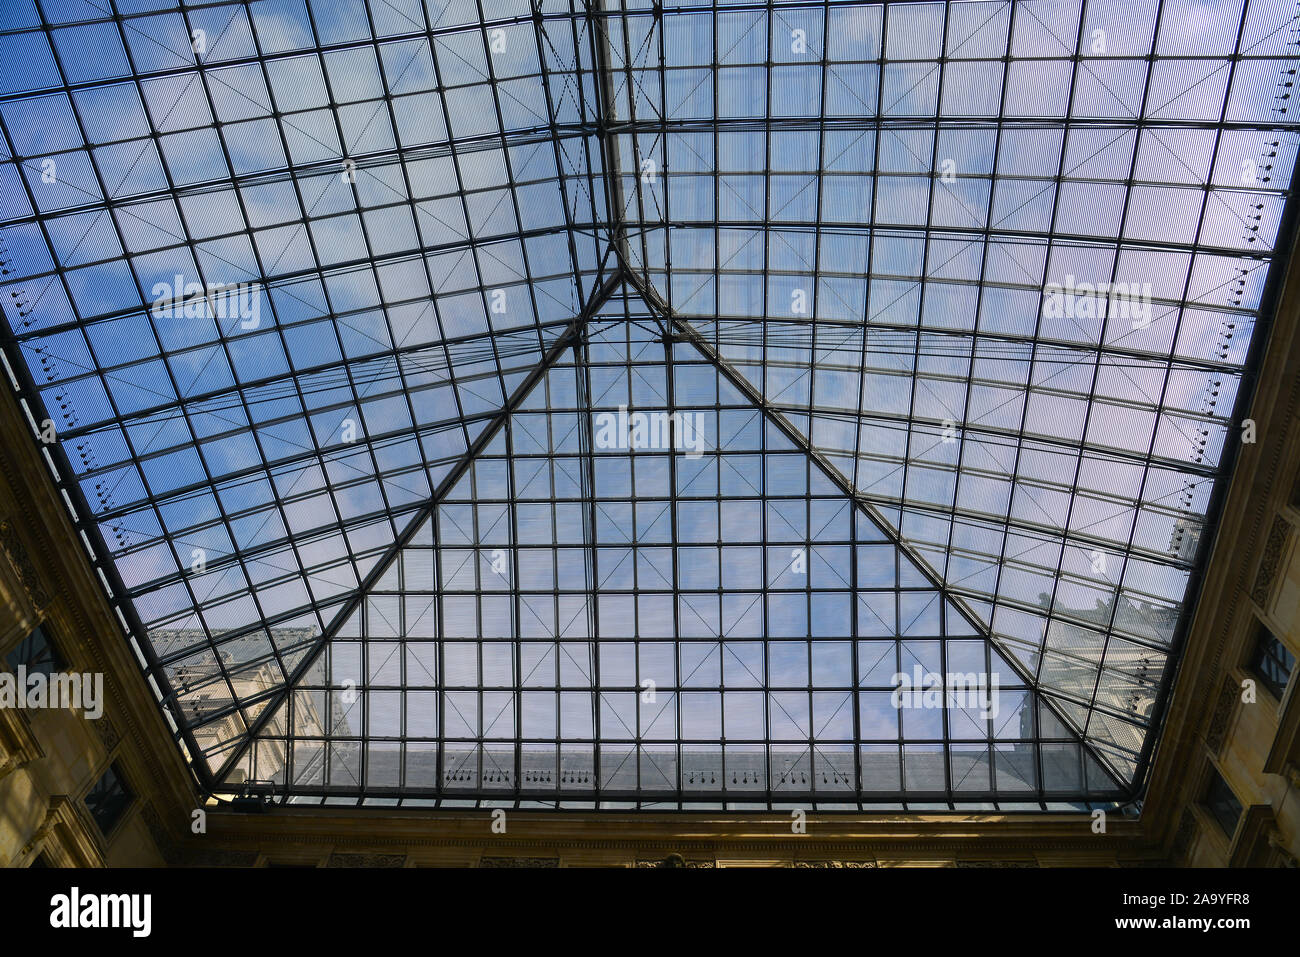 Paris, France - Oct 3, 2018. Interior of Louvre Museum in Paris, France. Louvre was the world most visited art museum, receiving 10 million visitors i Stock Photo